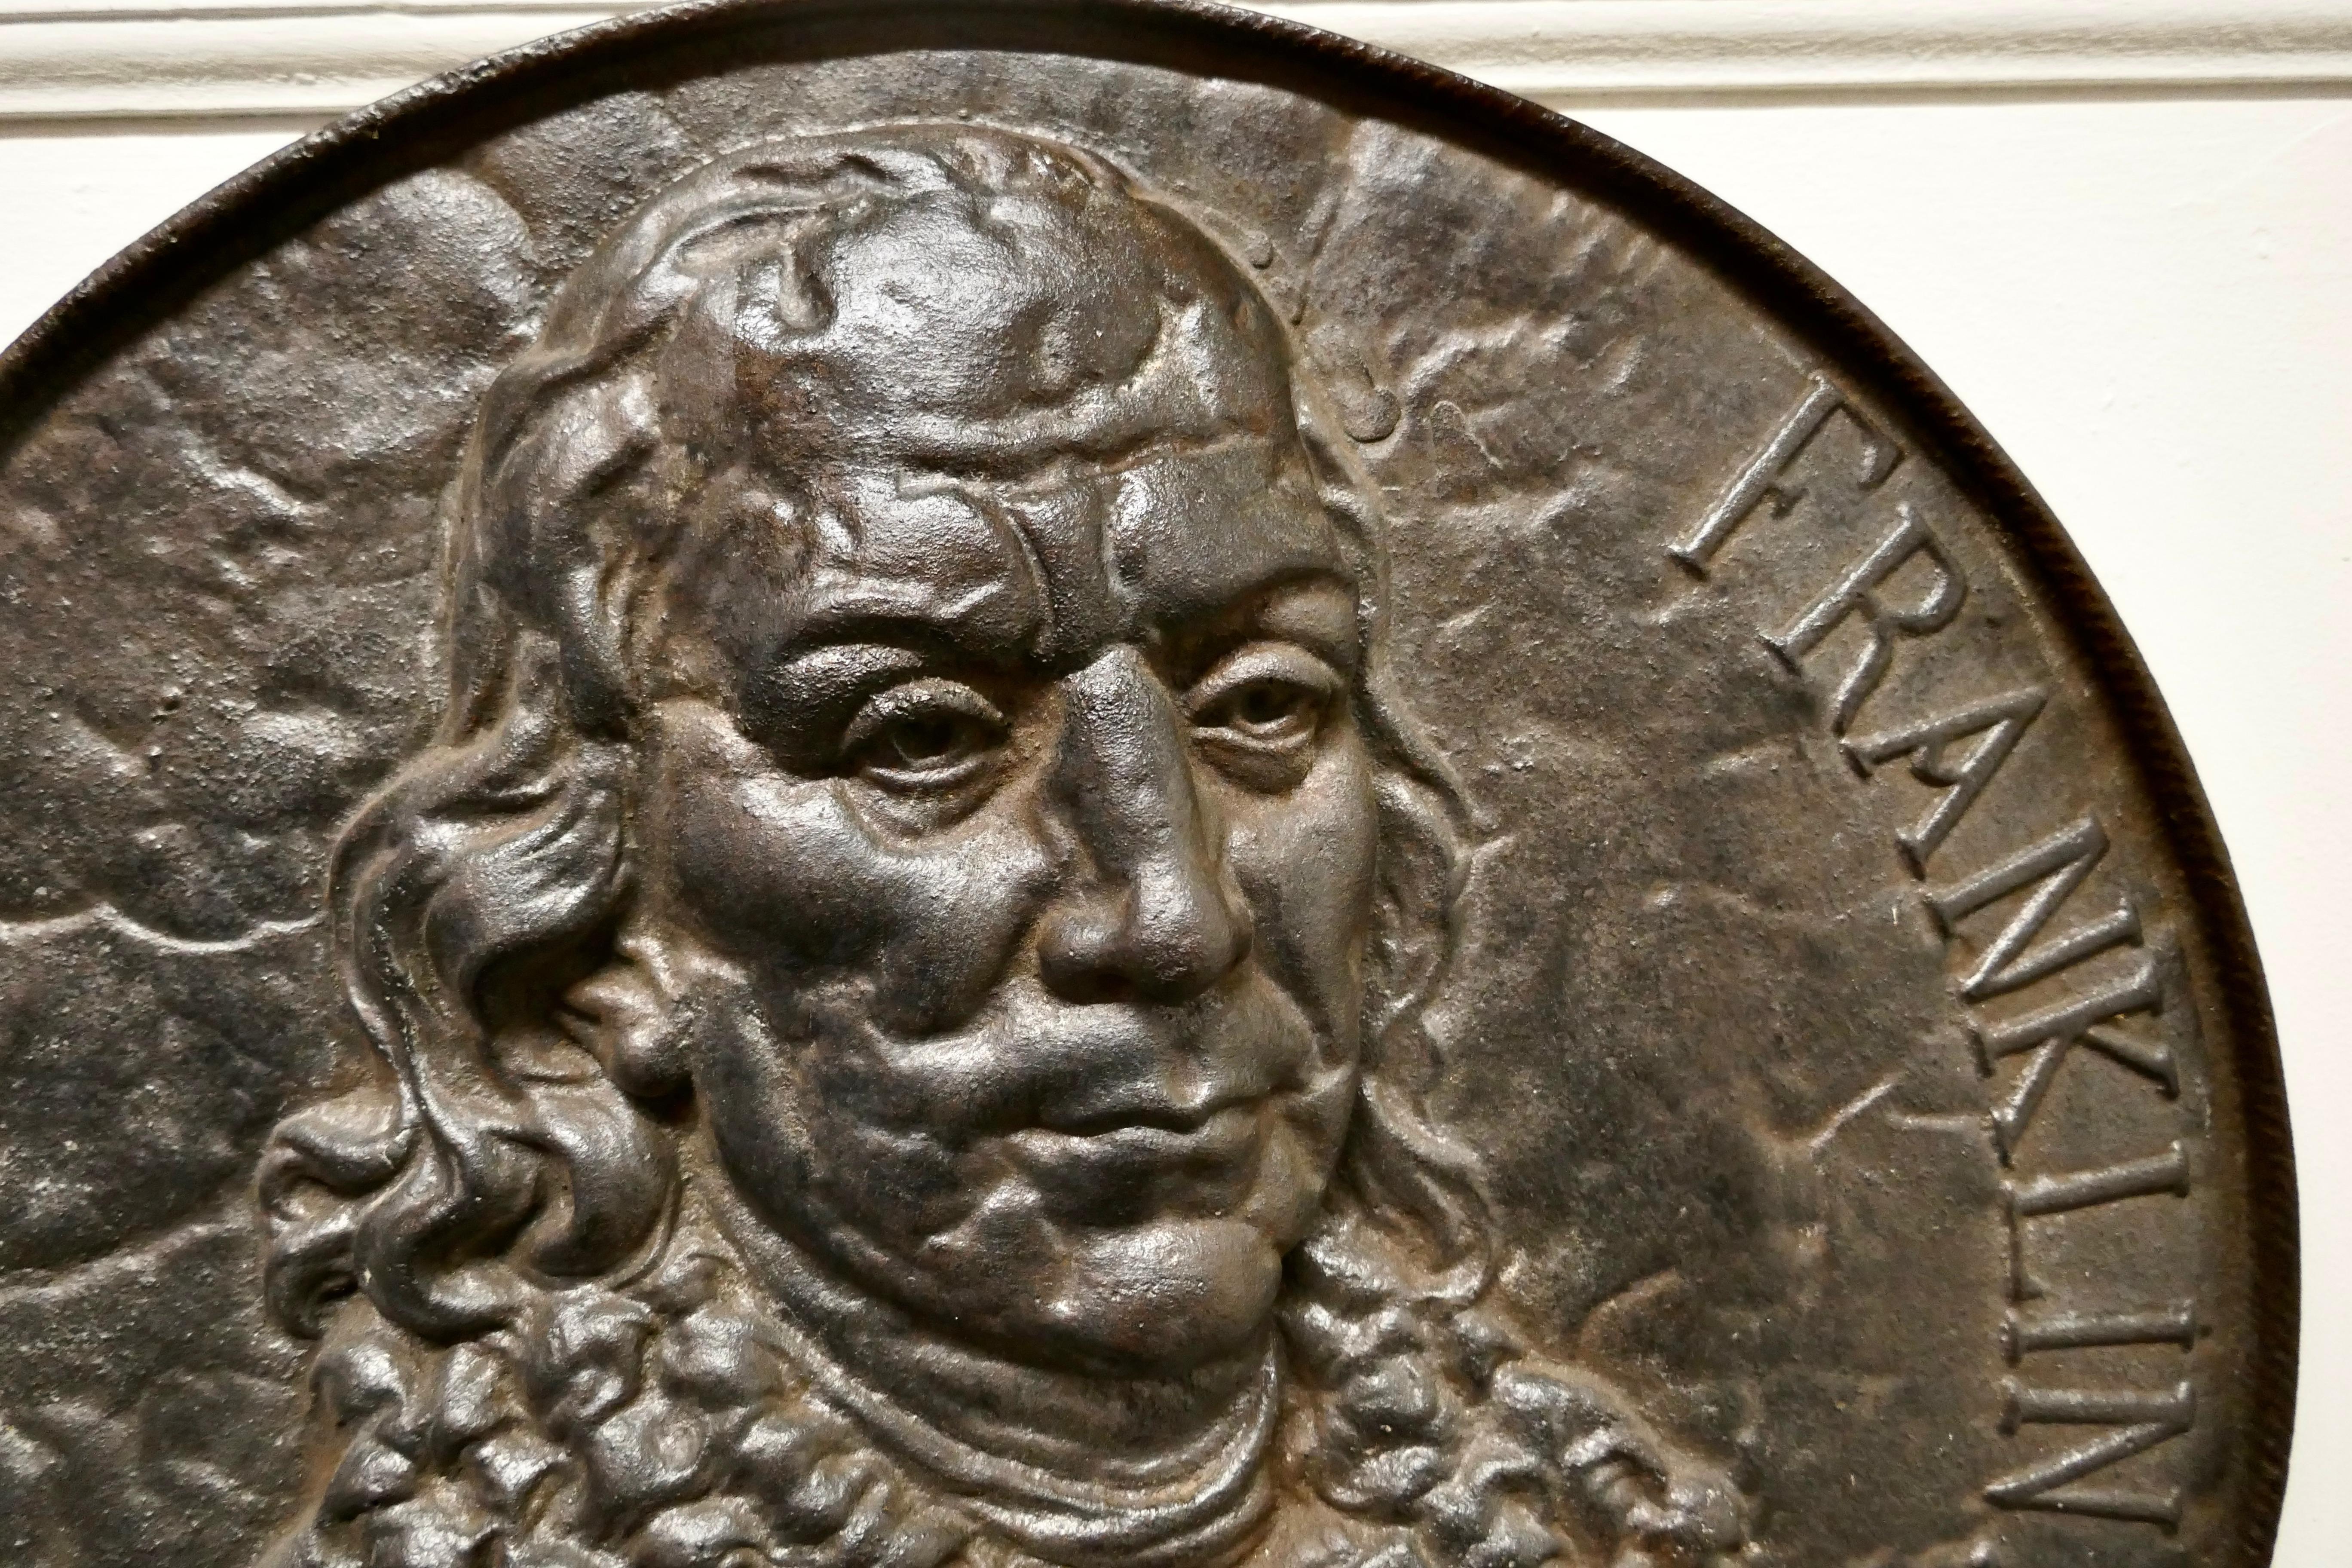 American Classical 19th Century Cast Iron Bust Portrait Plaque of Benjamin Franklin For Sale